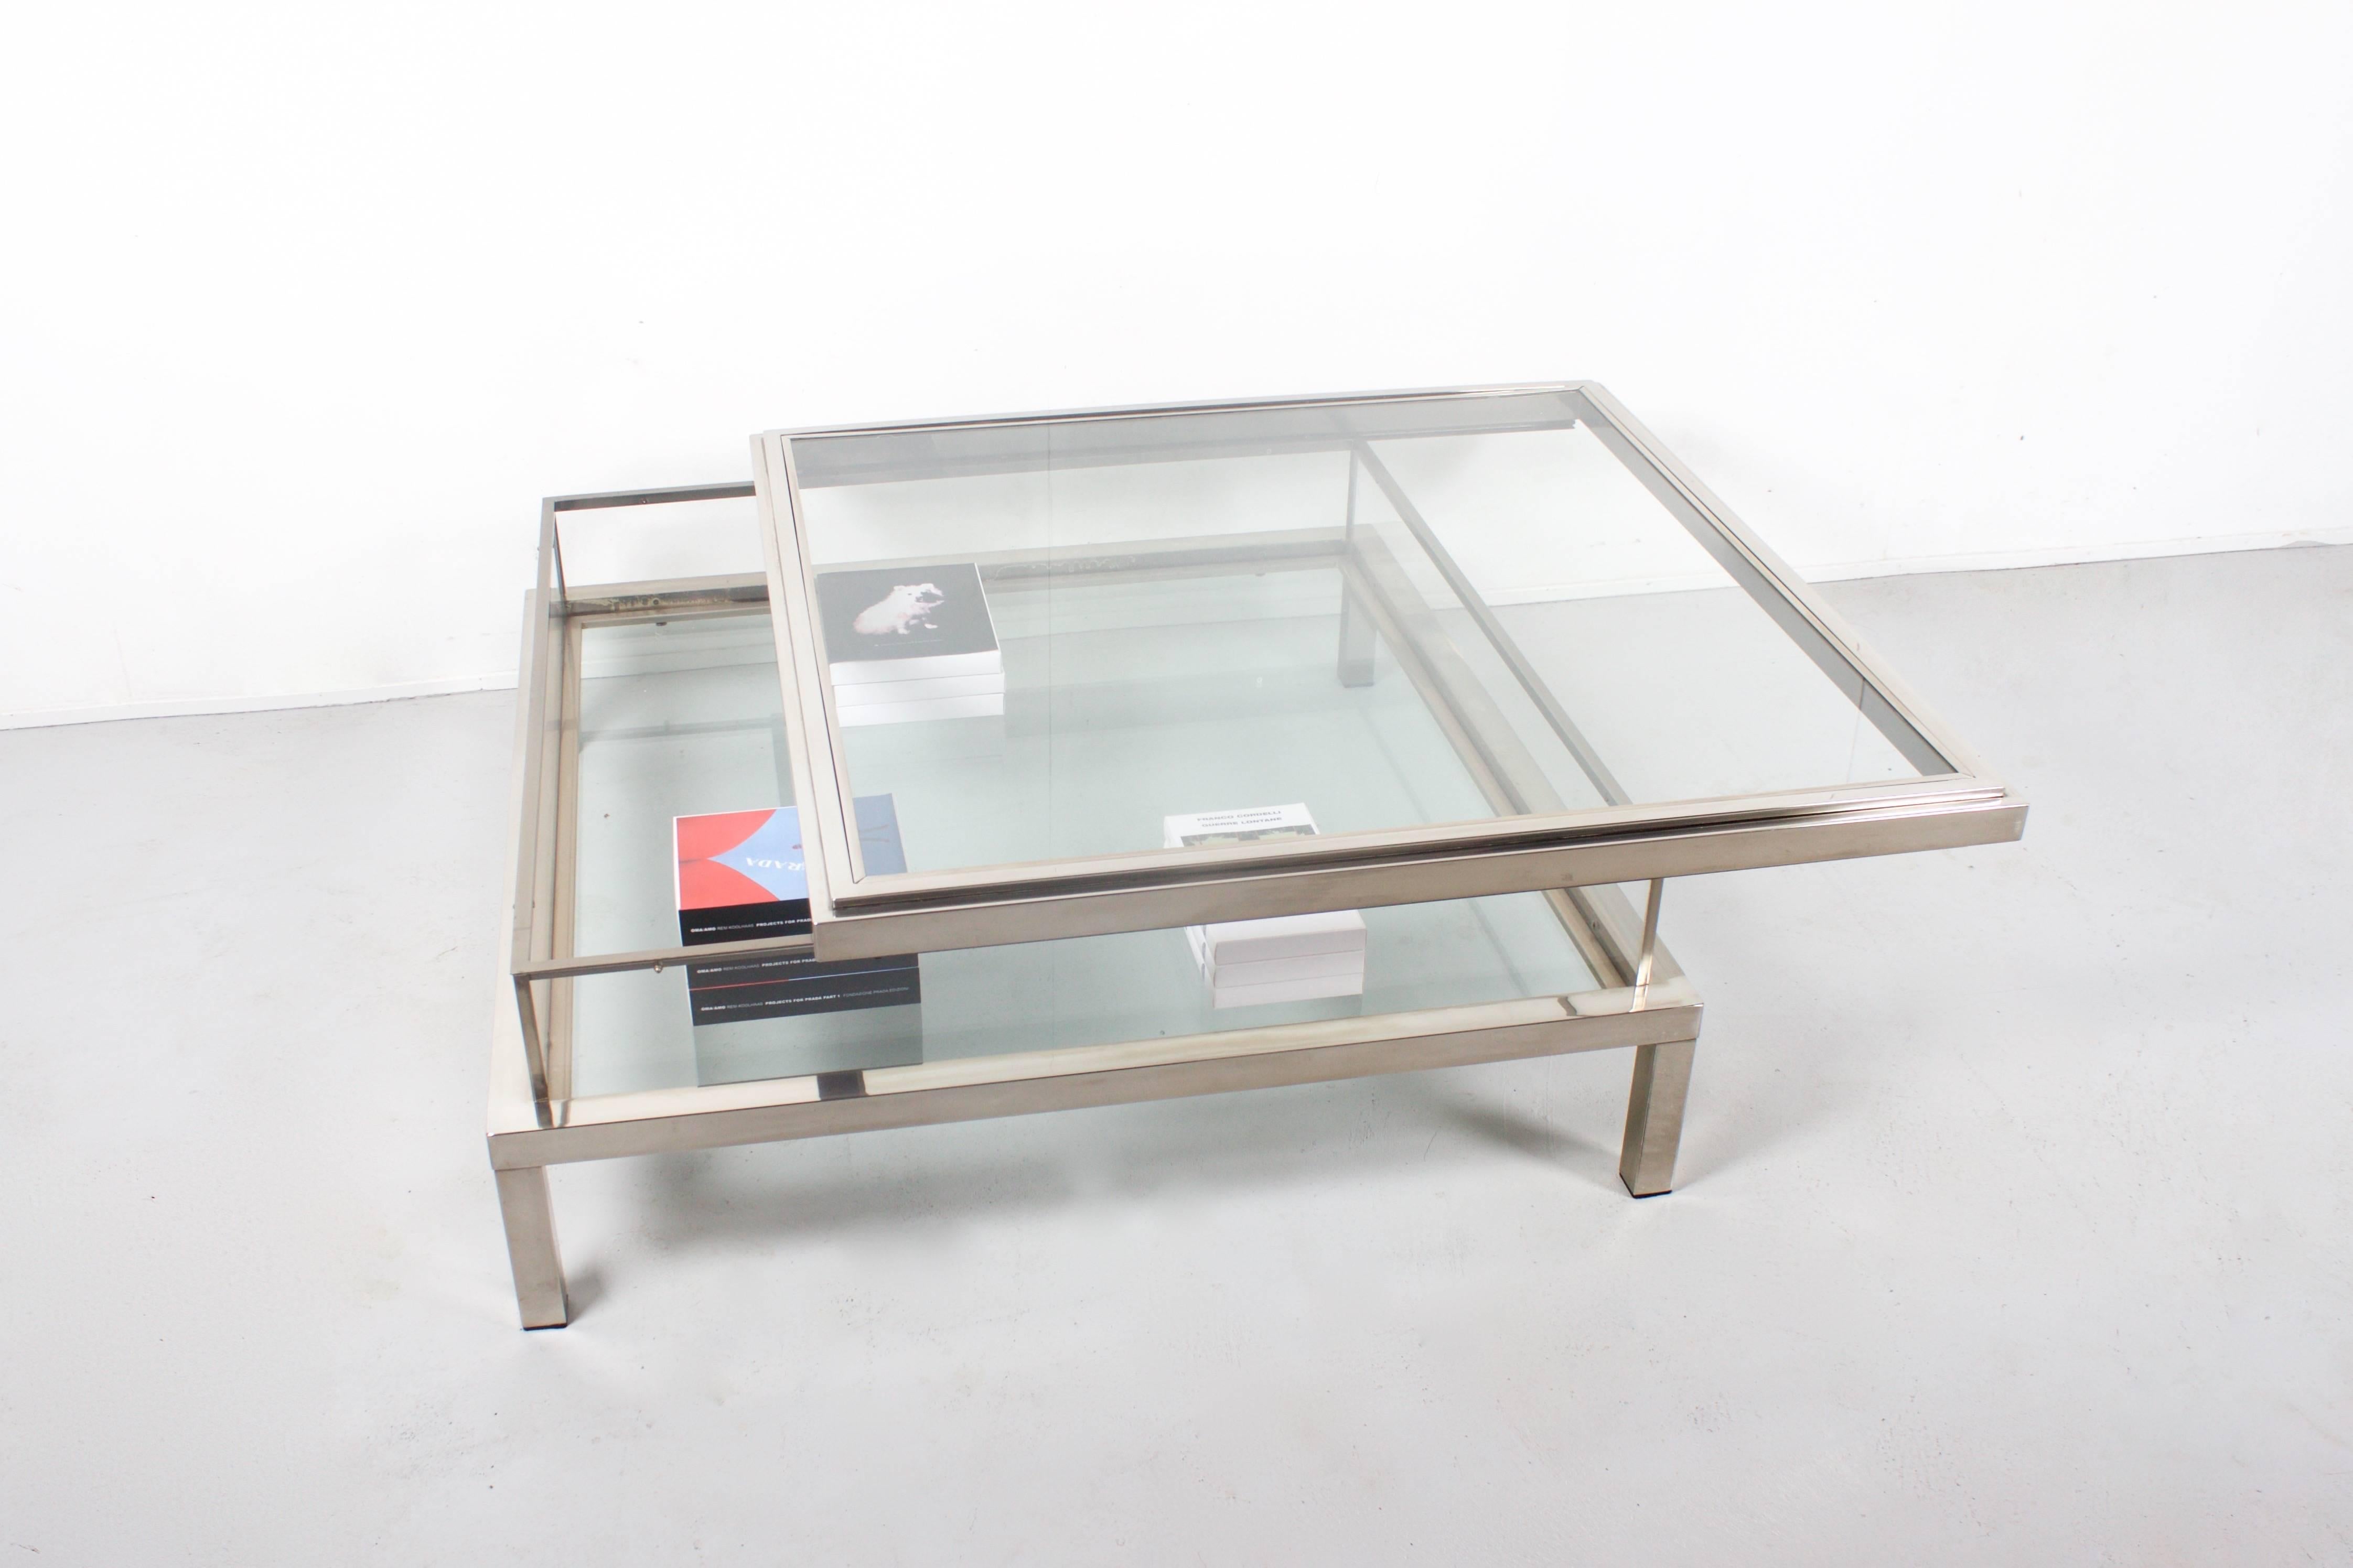 1970s coffee table by Maison Jansen in very good condition.

Satined chrome with glass tops and Lucite walls.

The top can slide open to reveal the inside compartment that can be used as a vitrine for books and magazines.

This table is very